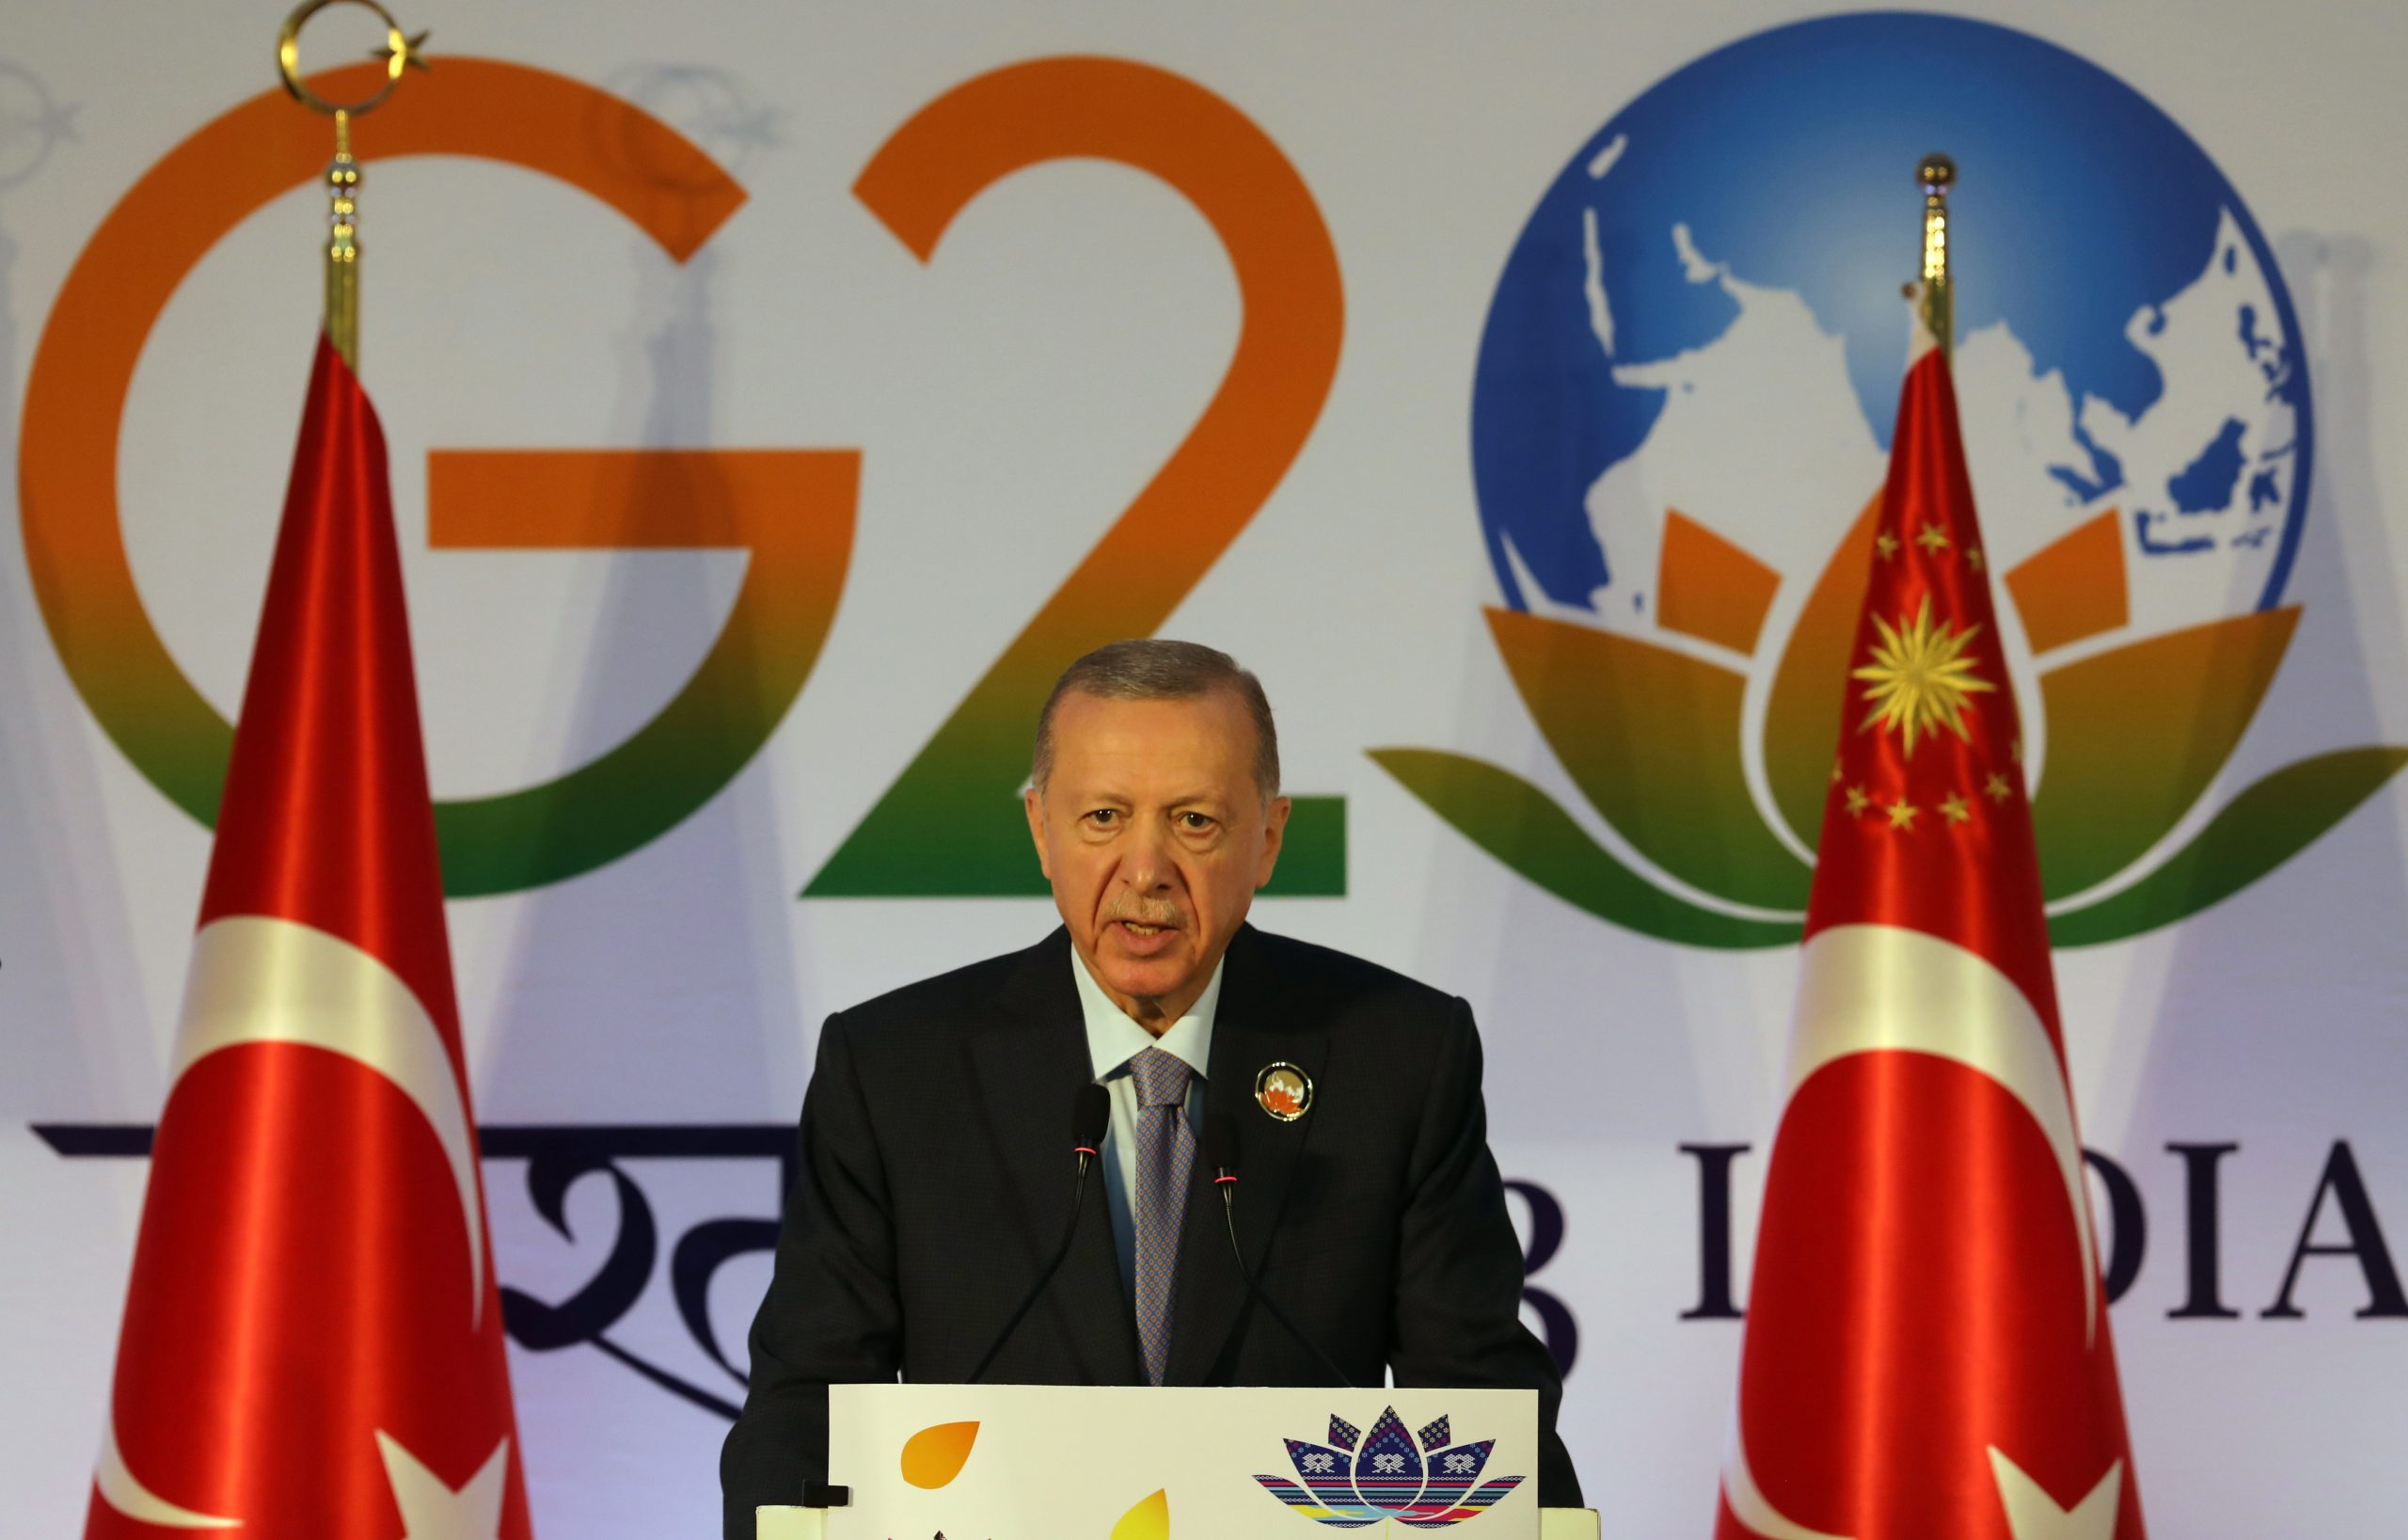 epa10852986 Turkish President Recep Tayyip Erdogan addresses a press conference at the international media center during the G20 Summit in New Delhi, India, 10 September 2023. The G20 Heads of State and Government summit took place in the Indian capital on 09 and 10 September.  EPA/RAJAT GUPTA